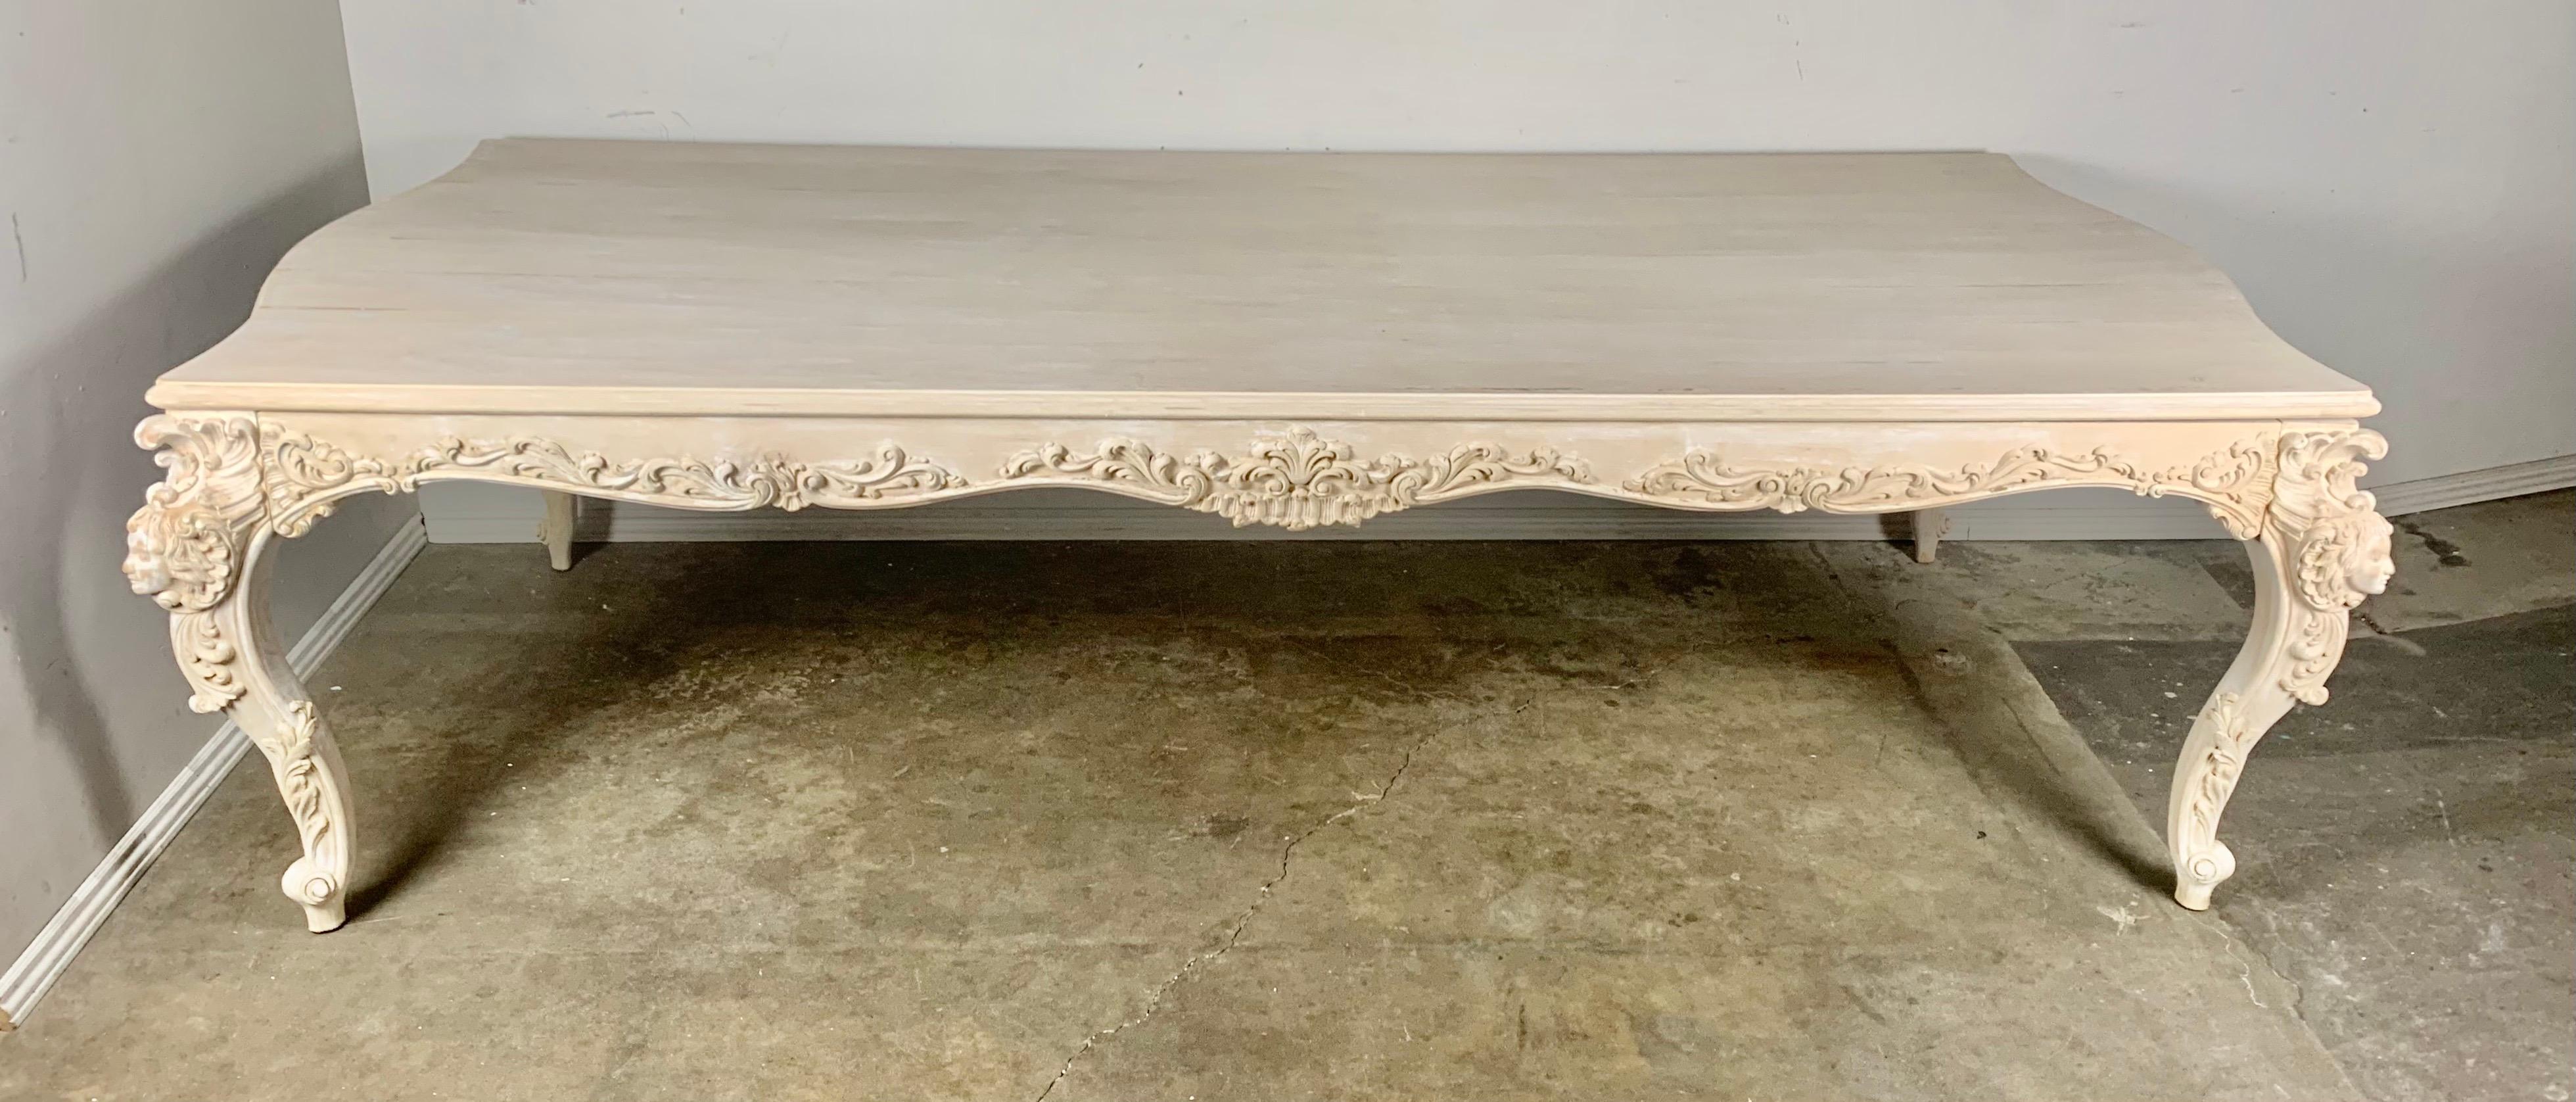 French carved dining table that stands on four cabriole carved legs with Cherub Faces on all corners. The scalloped apron also has beautiful carving throughout. There are small remnants of paint that remain throughout the table.